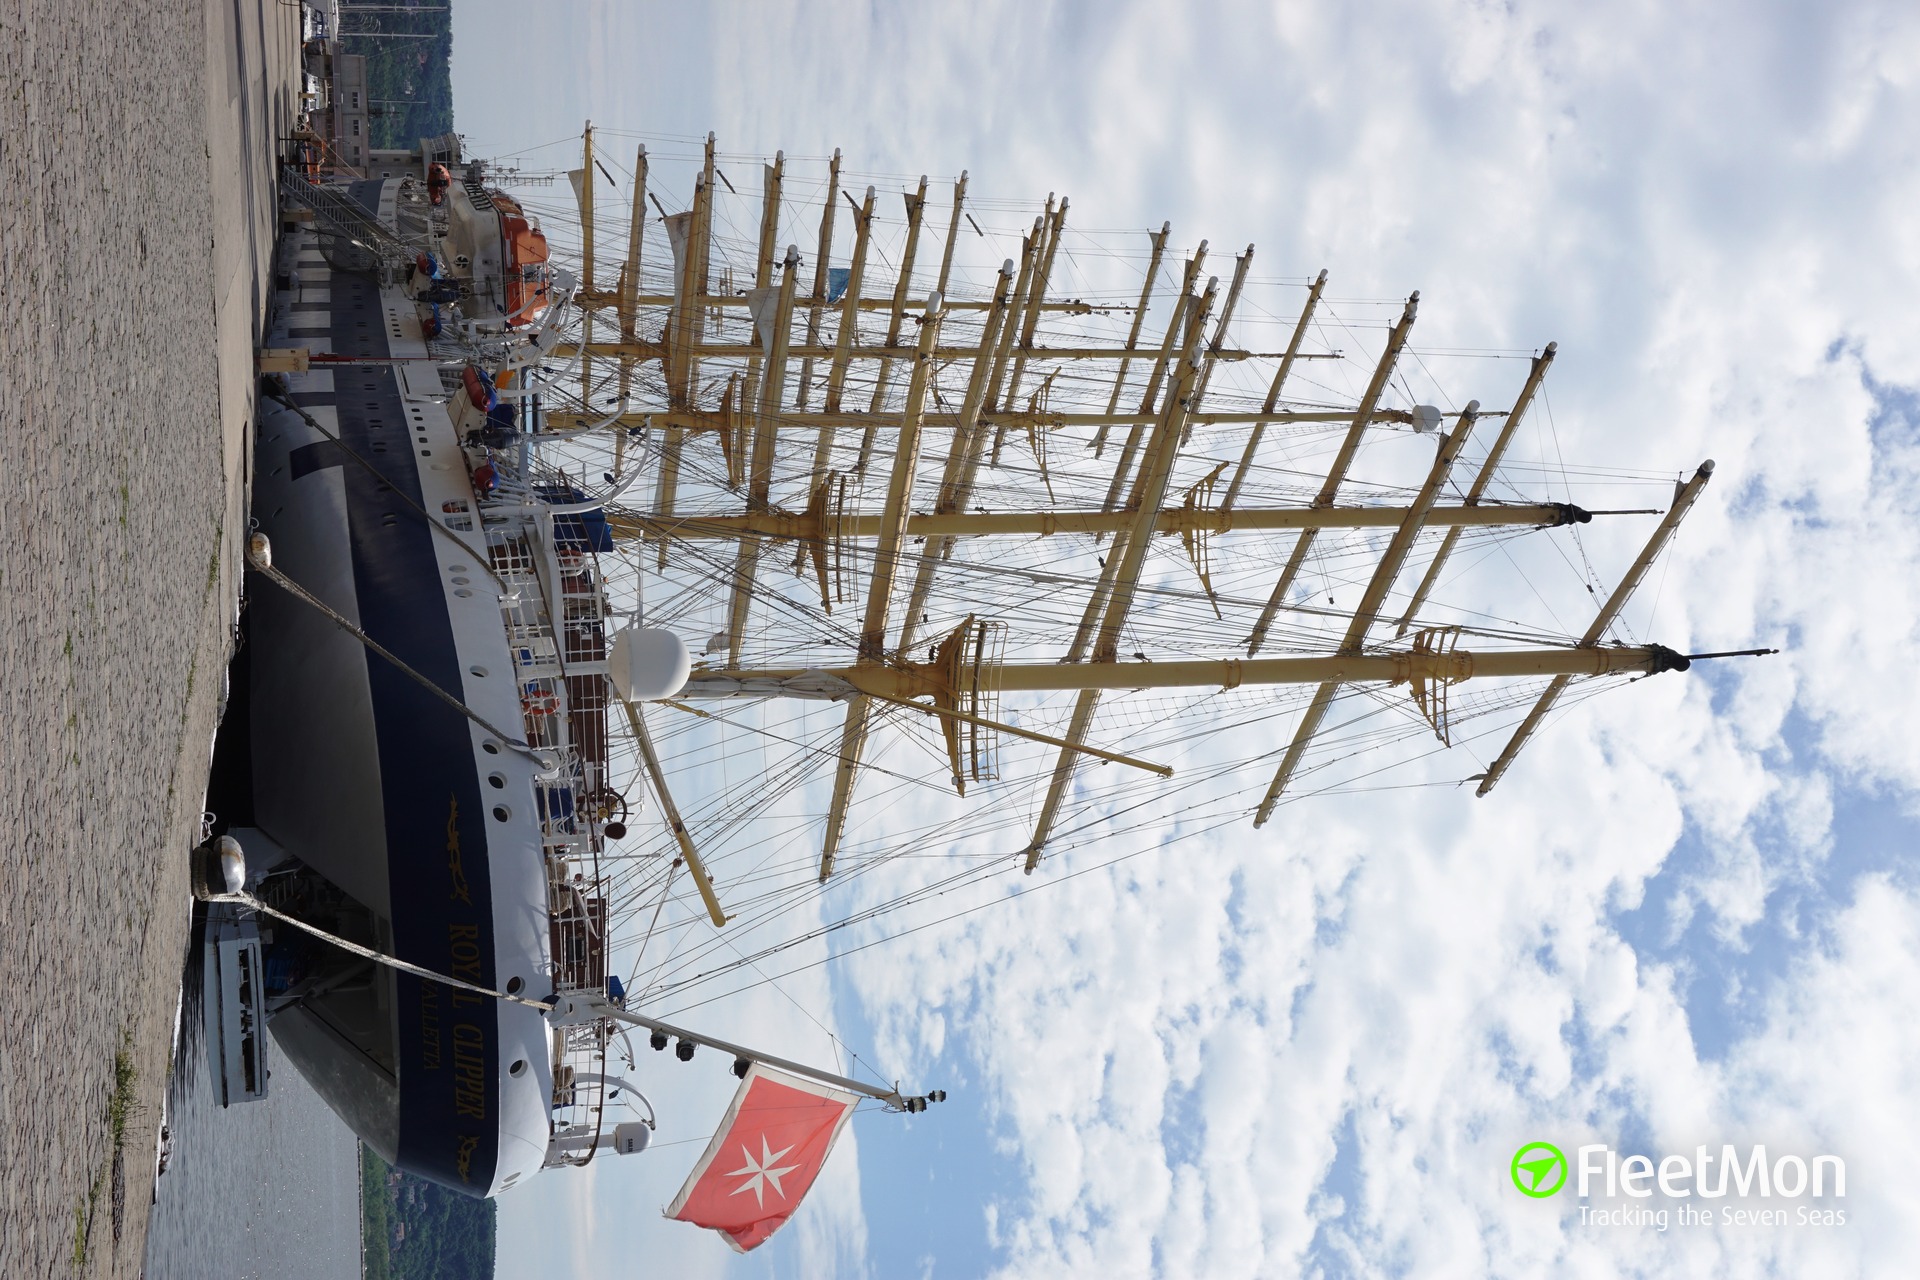 royal clipper review